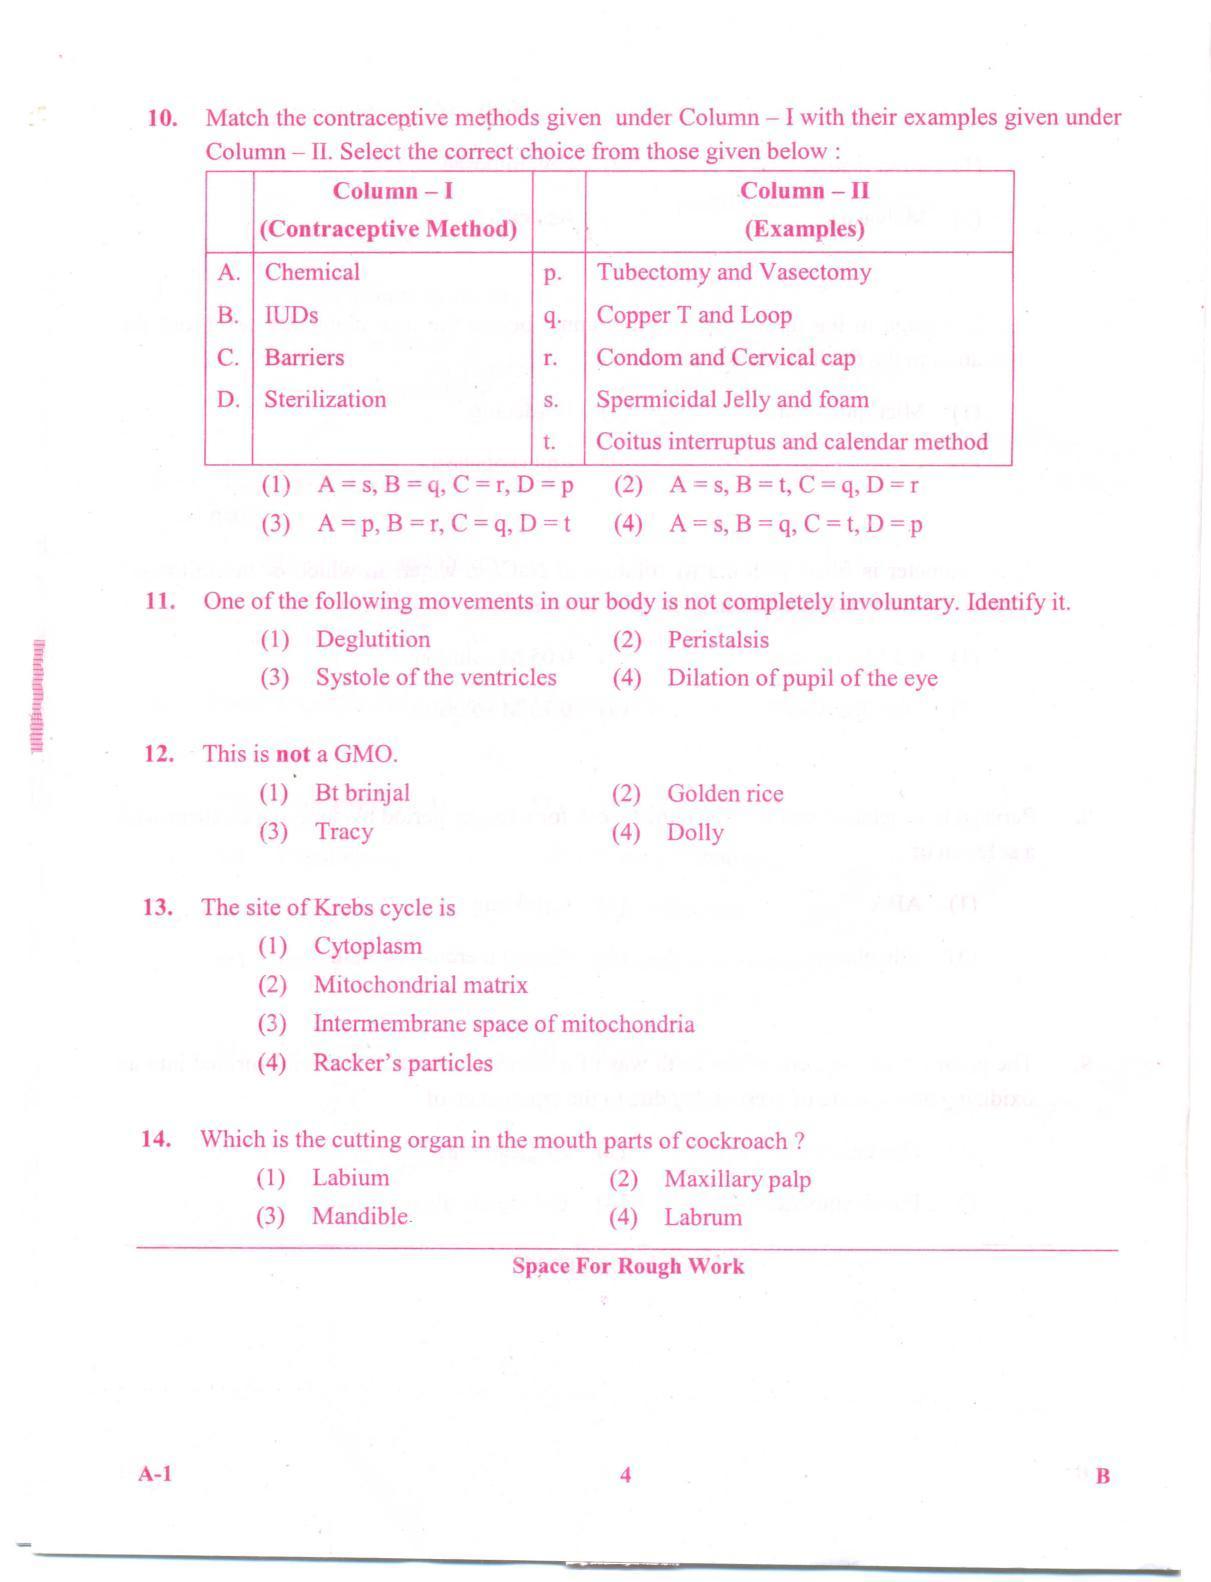 KCET Biology 2012 Question Papers - Page 4